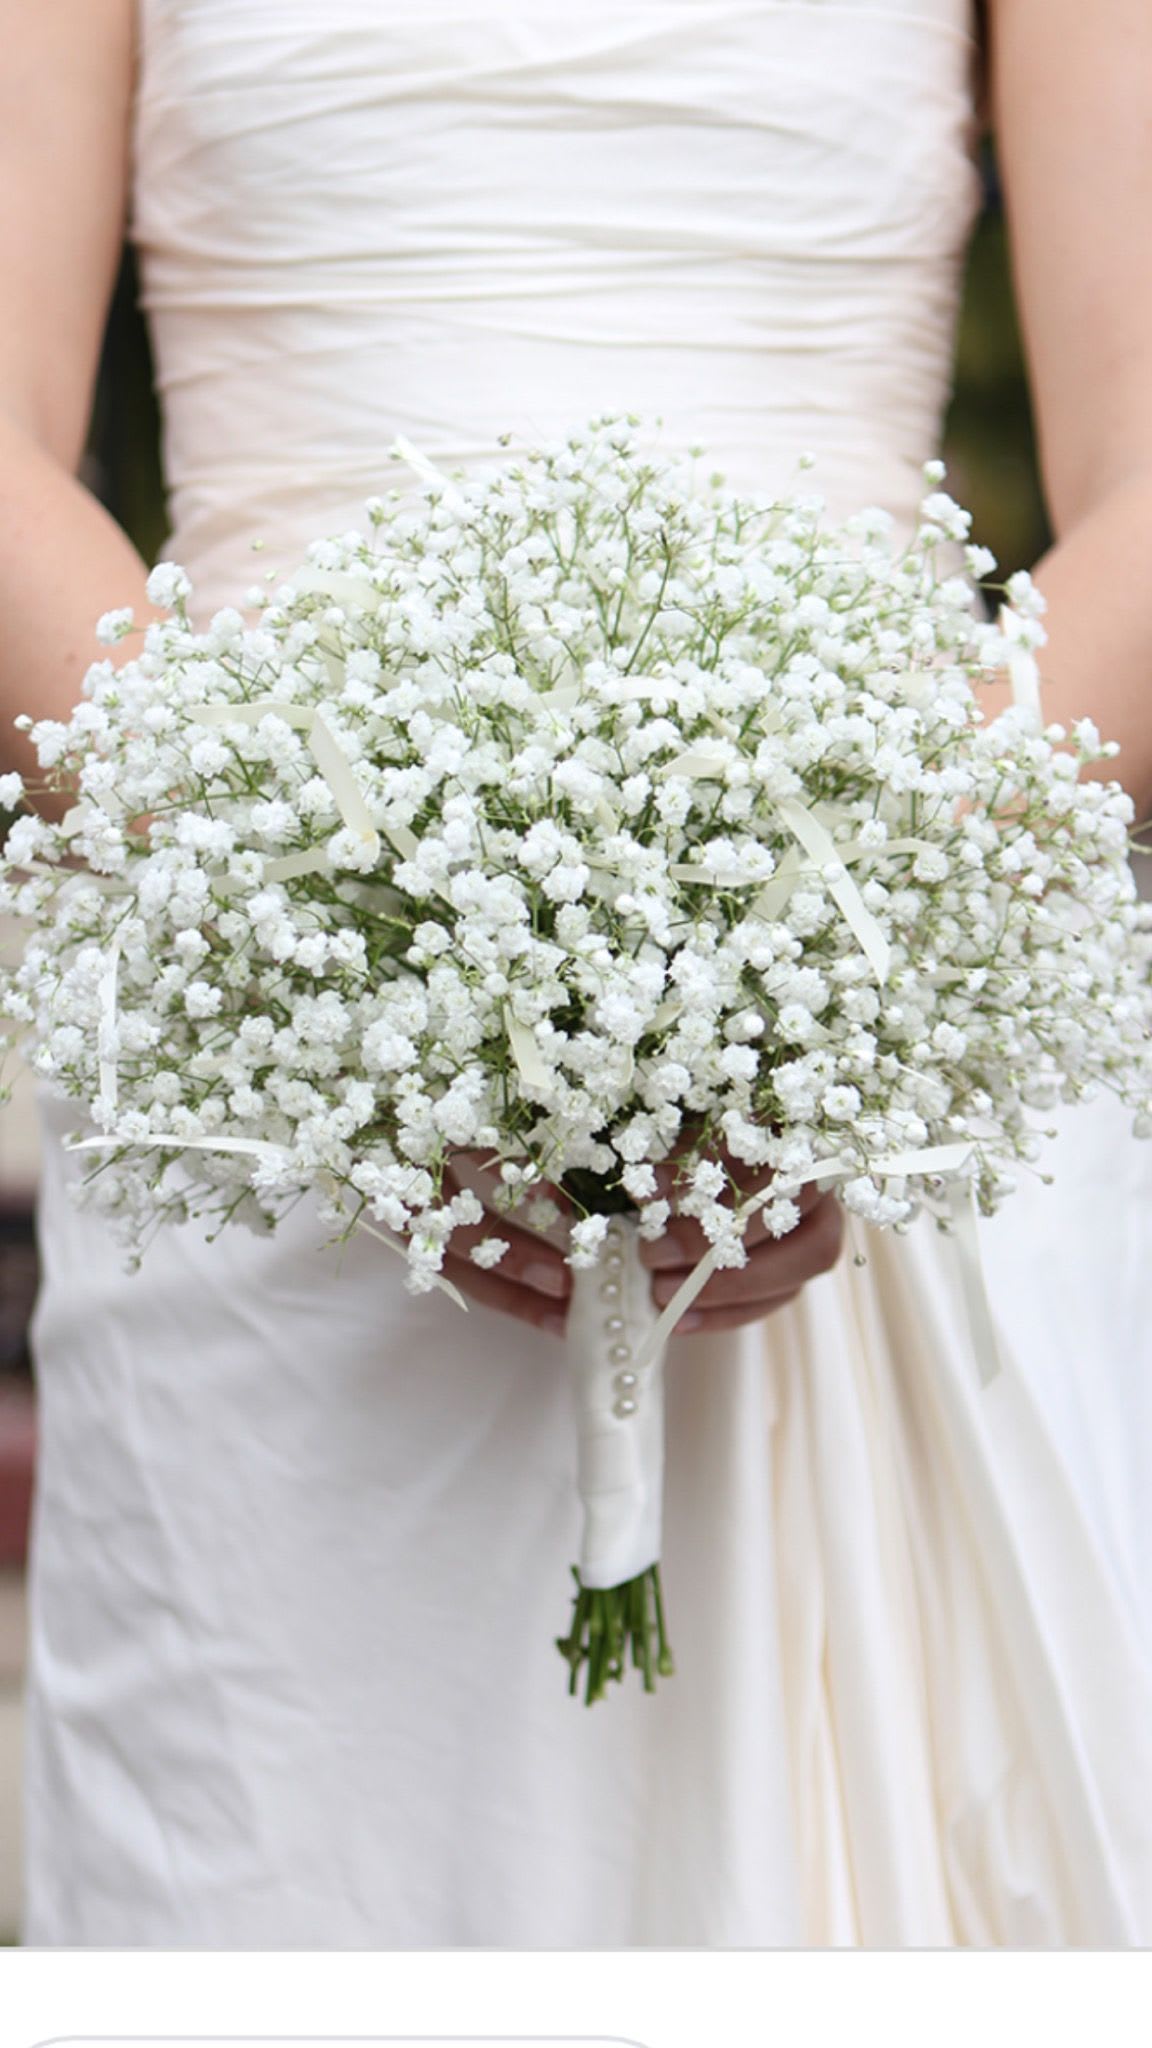 Babys Breath Meaning: Delicate Appearance and Sweet Fragrance